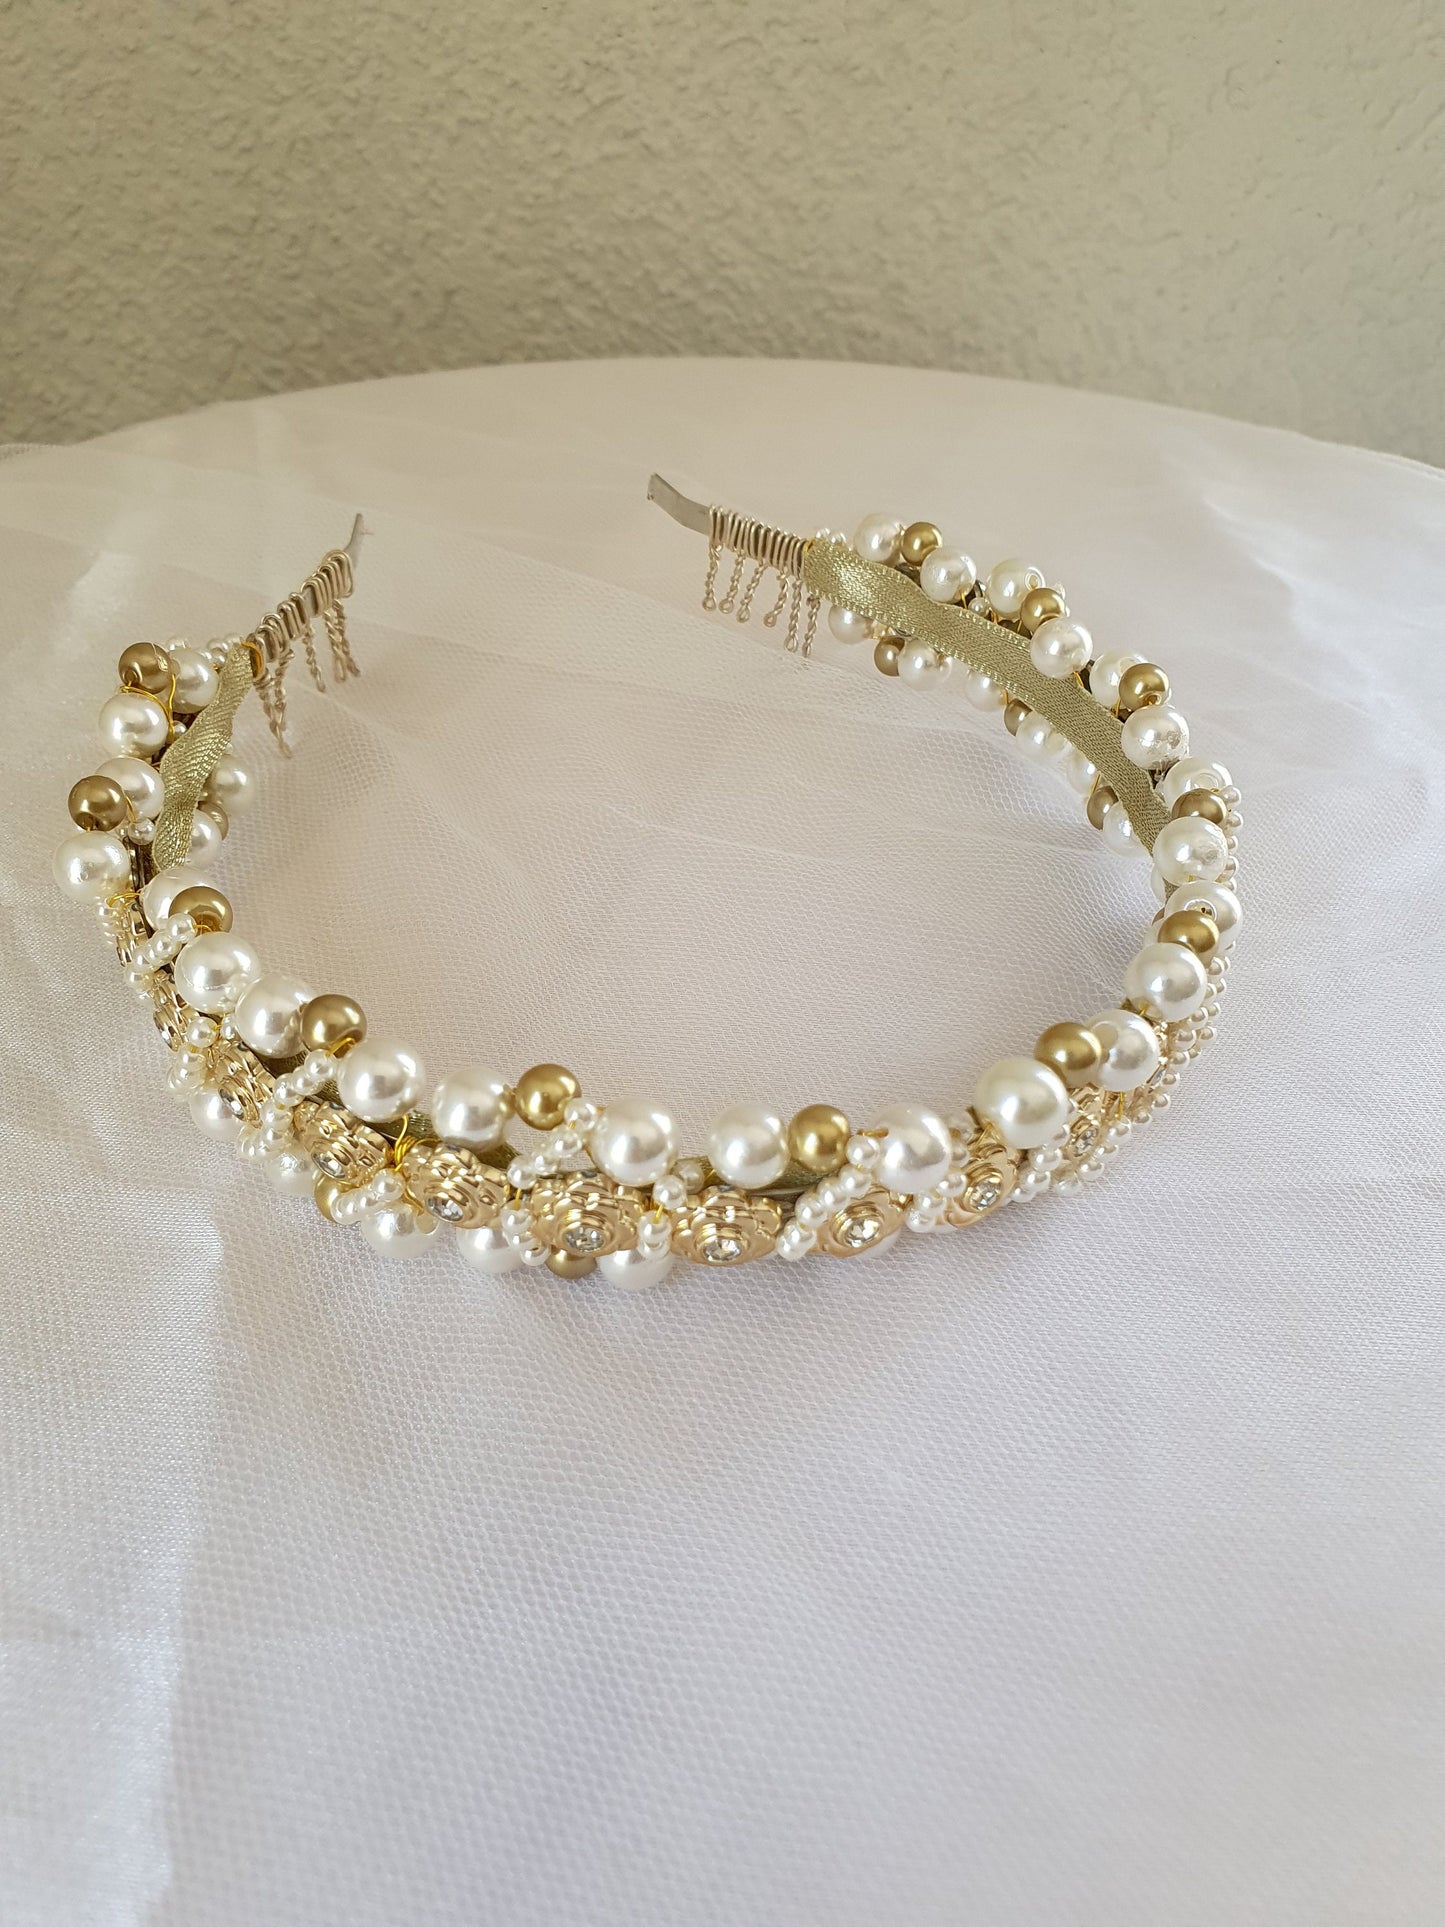 Handmade headband with pearls and gold plastic roses - Beautiful headband, unique festive diadem, wedding, special occasion